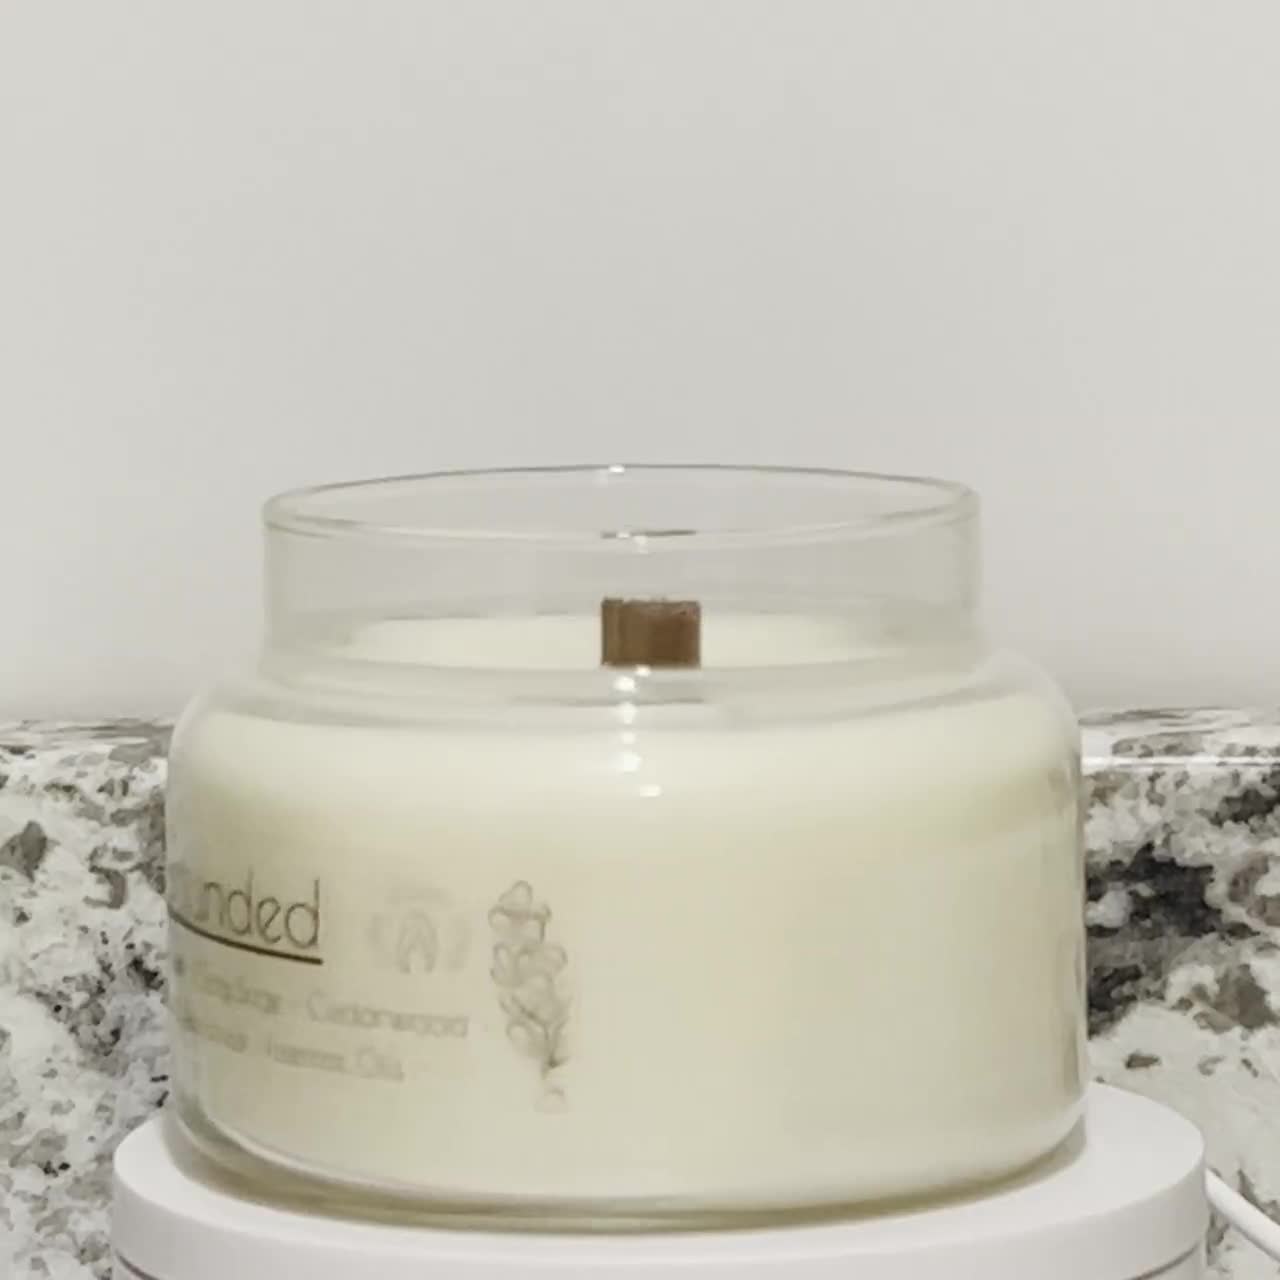 You Are Grounded Frankincense & Patchouli 8oz Candle